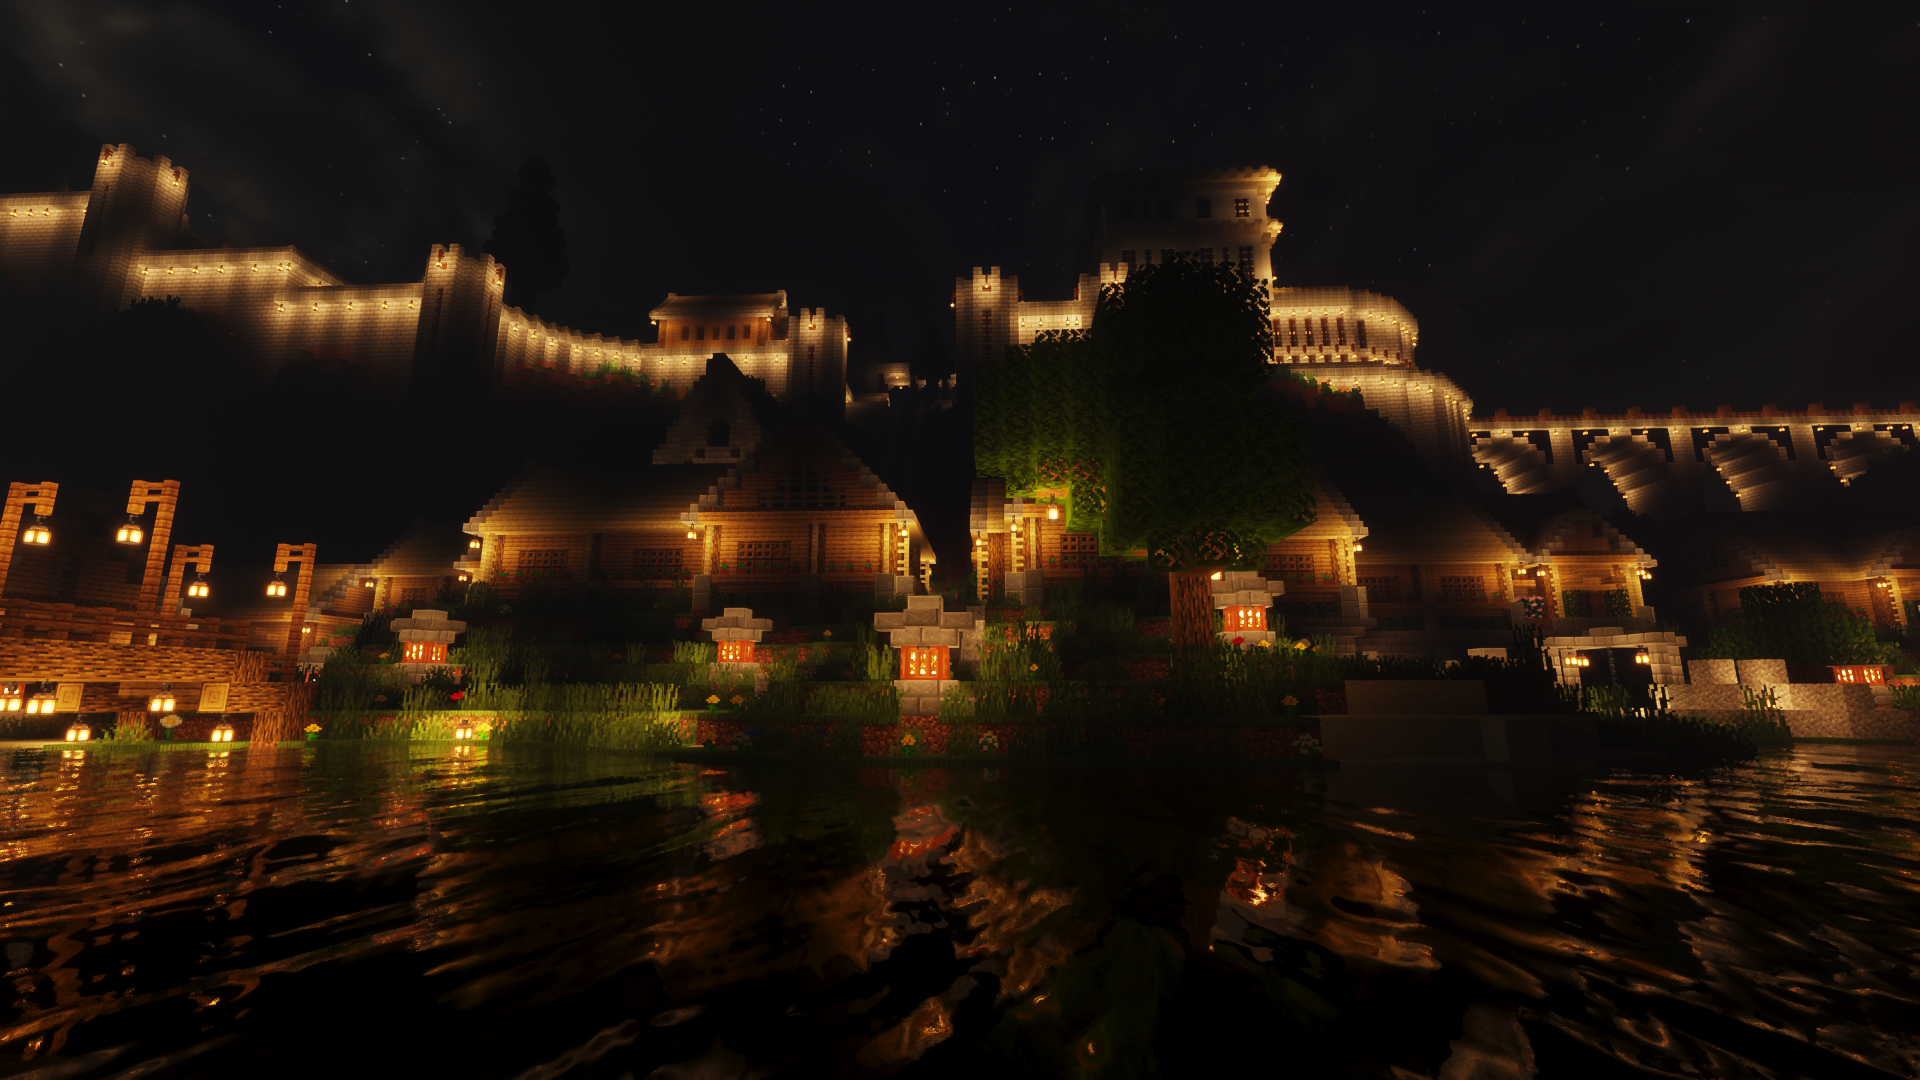 Minecraft Building Video Games Shaders Night City Lights CGi Castle Water 1920x1080